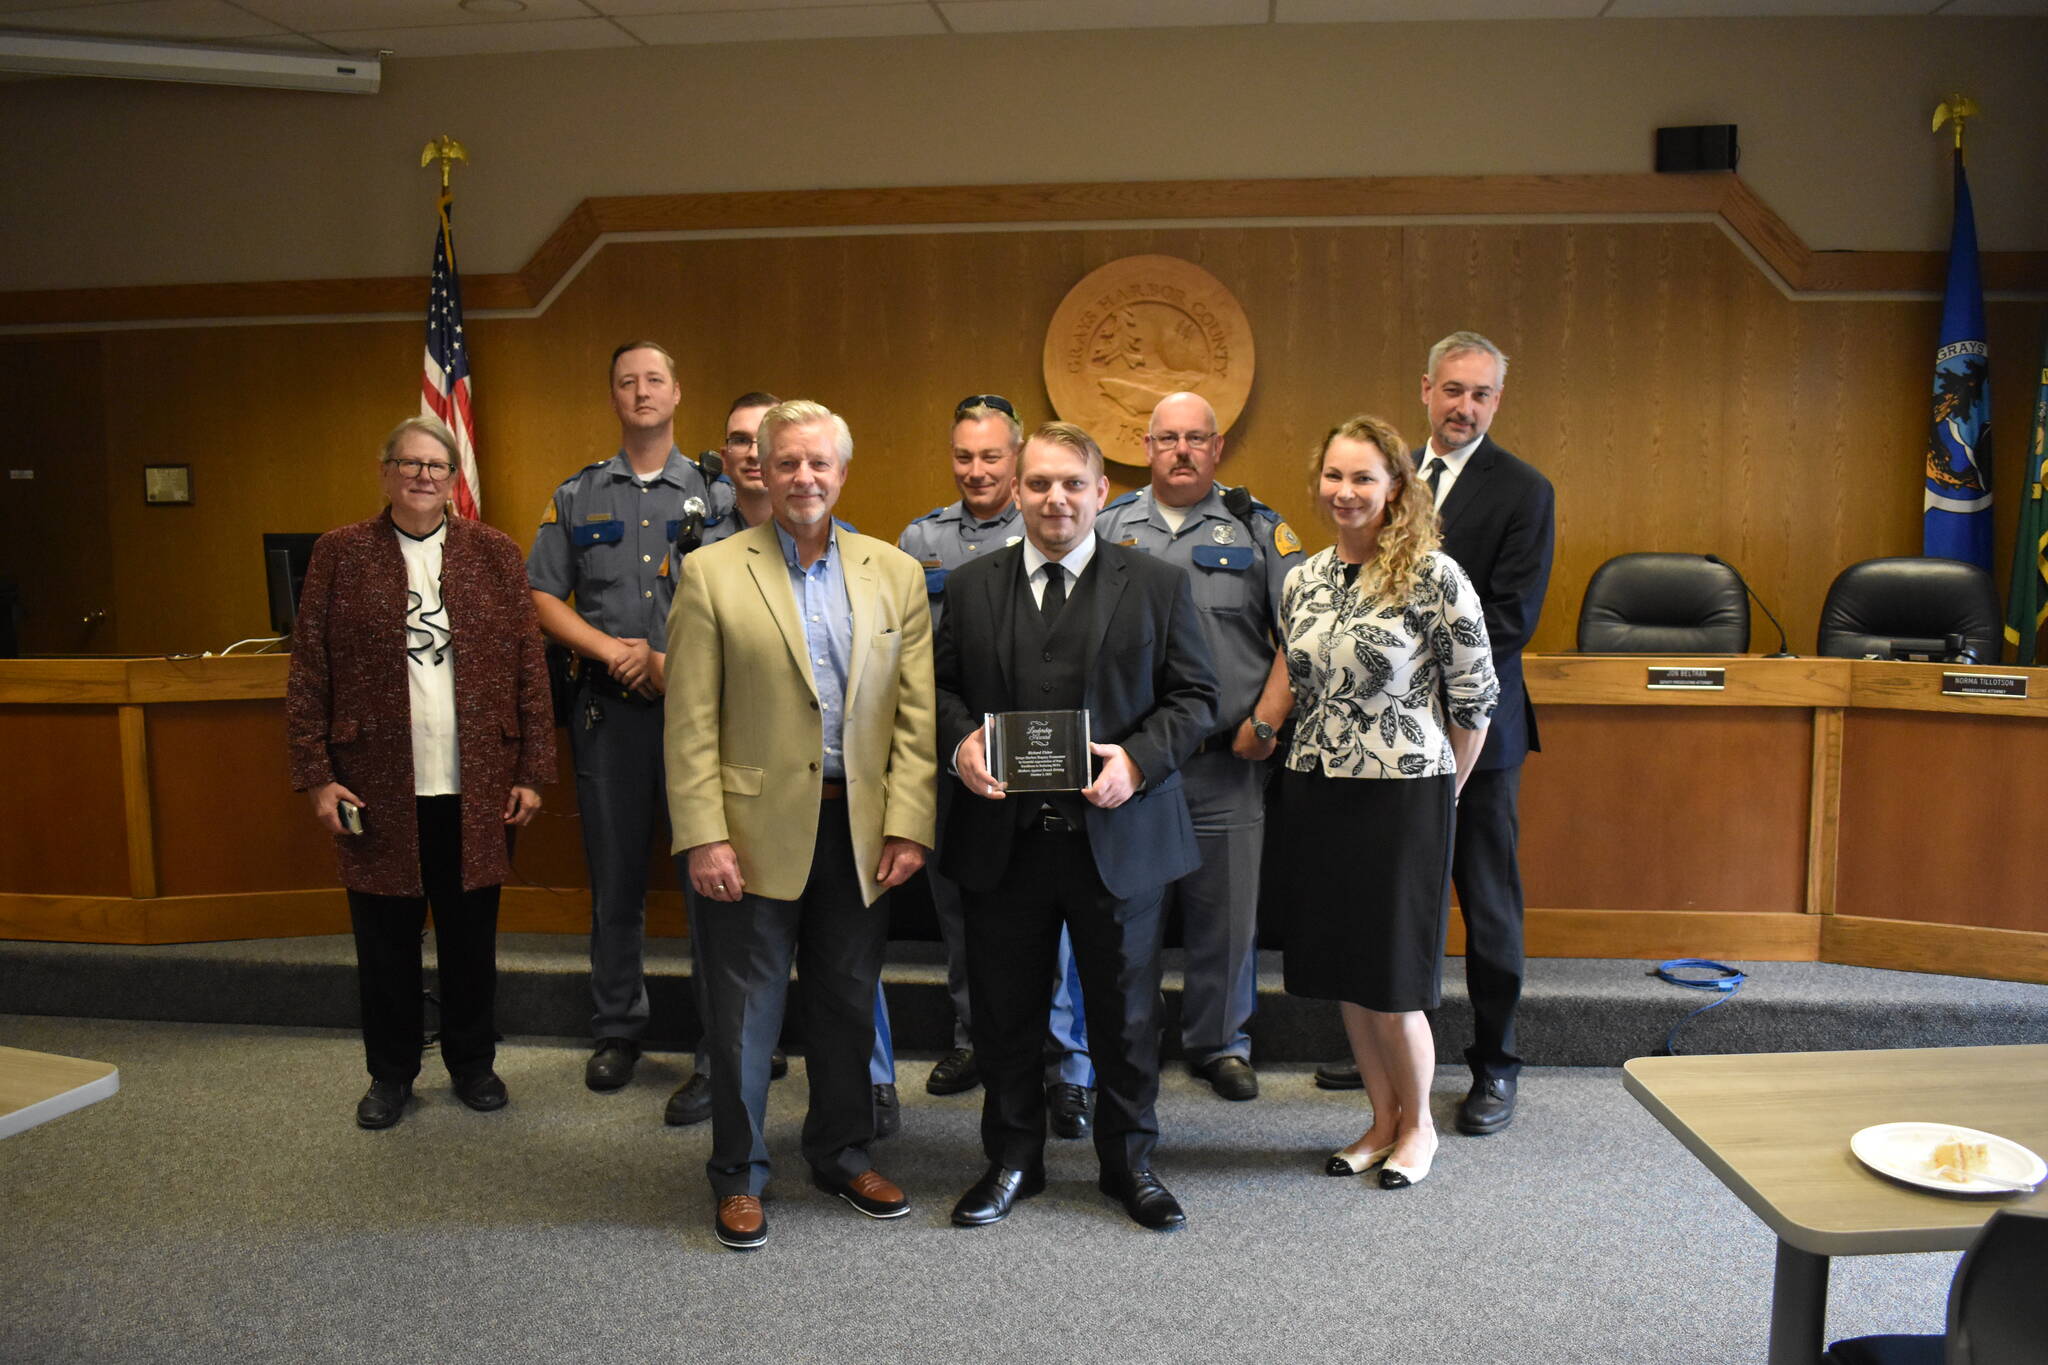 Allen Leister / The Daily World 
Grays Harbor Deputy Prosecutor Richard Fisher, (holding award) was presented with a Mothers Against Drunk Driving Leadership Award by David Maughan (left of Fisher), at the Grays Harbor Large Commissioners Meeting Room on Thursday, Oct. 27, in Montesano.